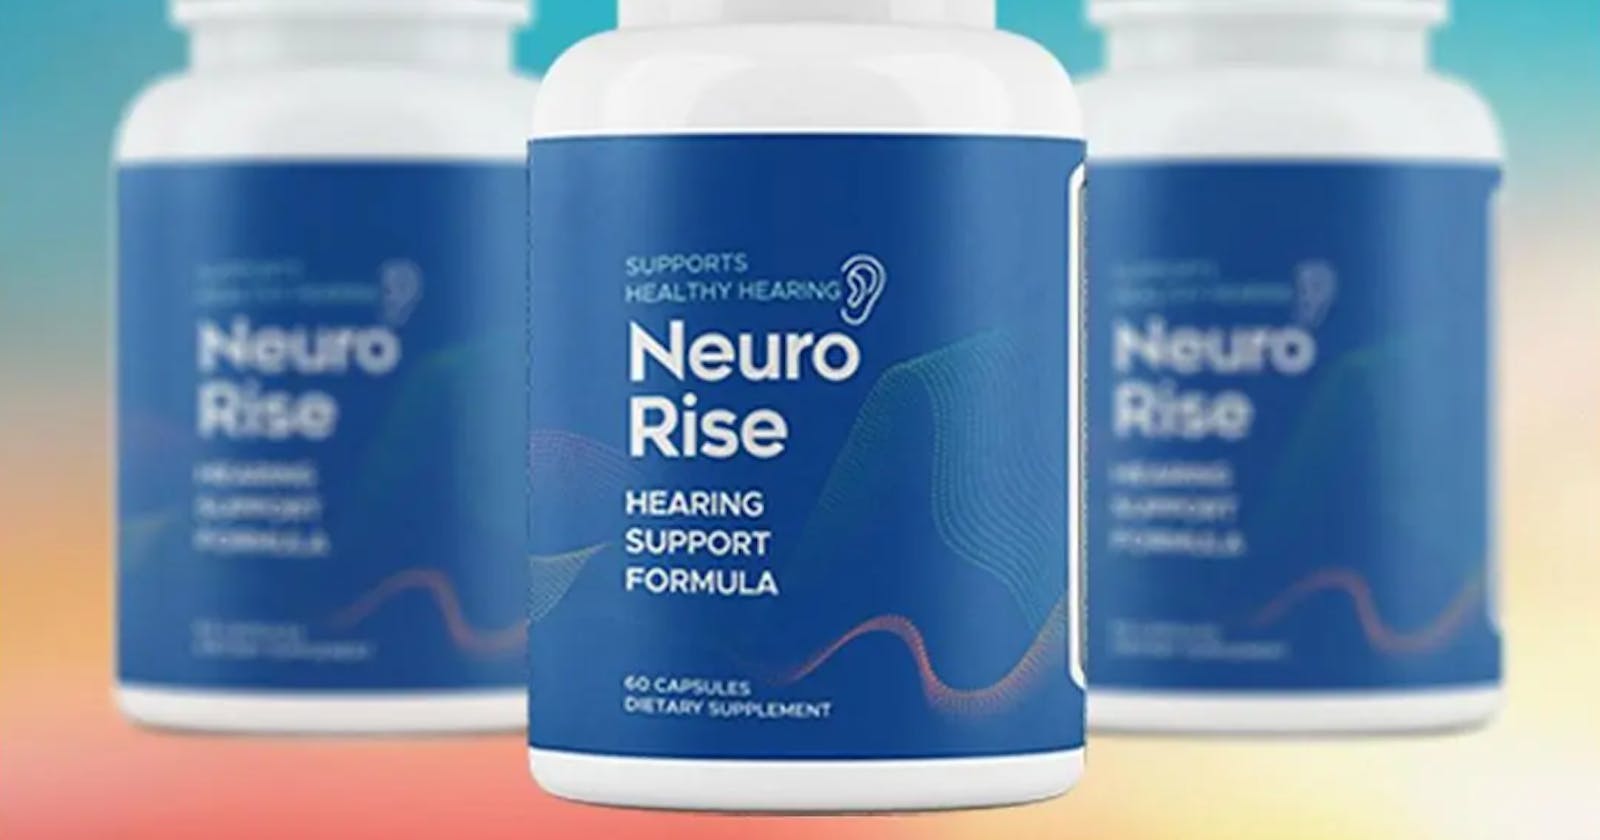 Neuro Rise Hearing Support Formula Review